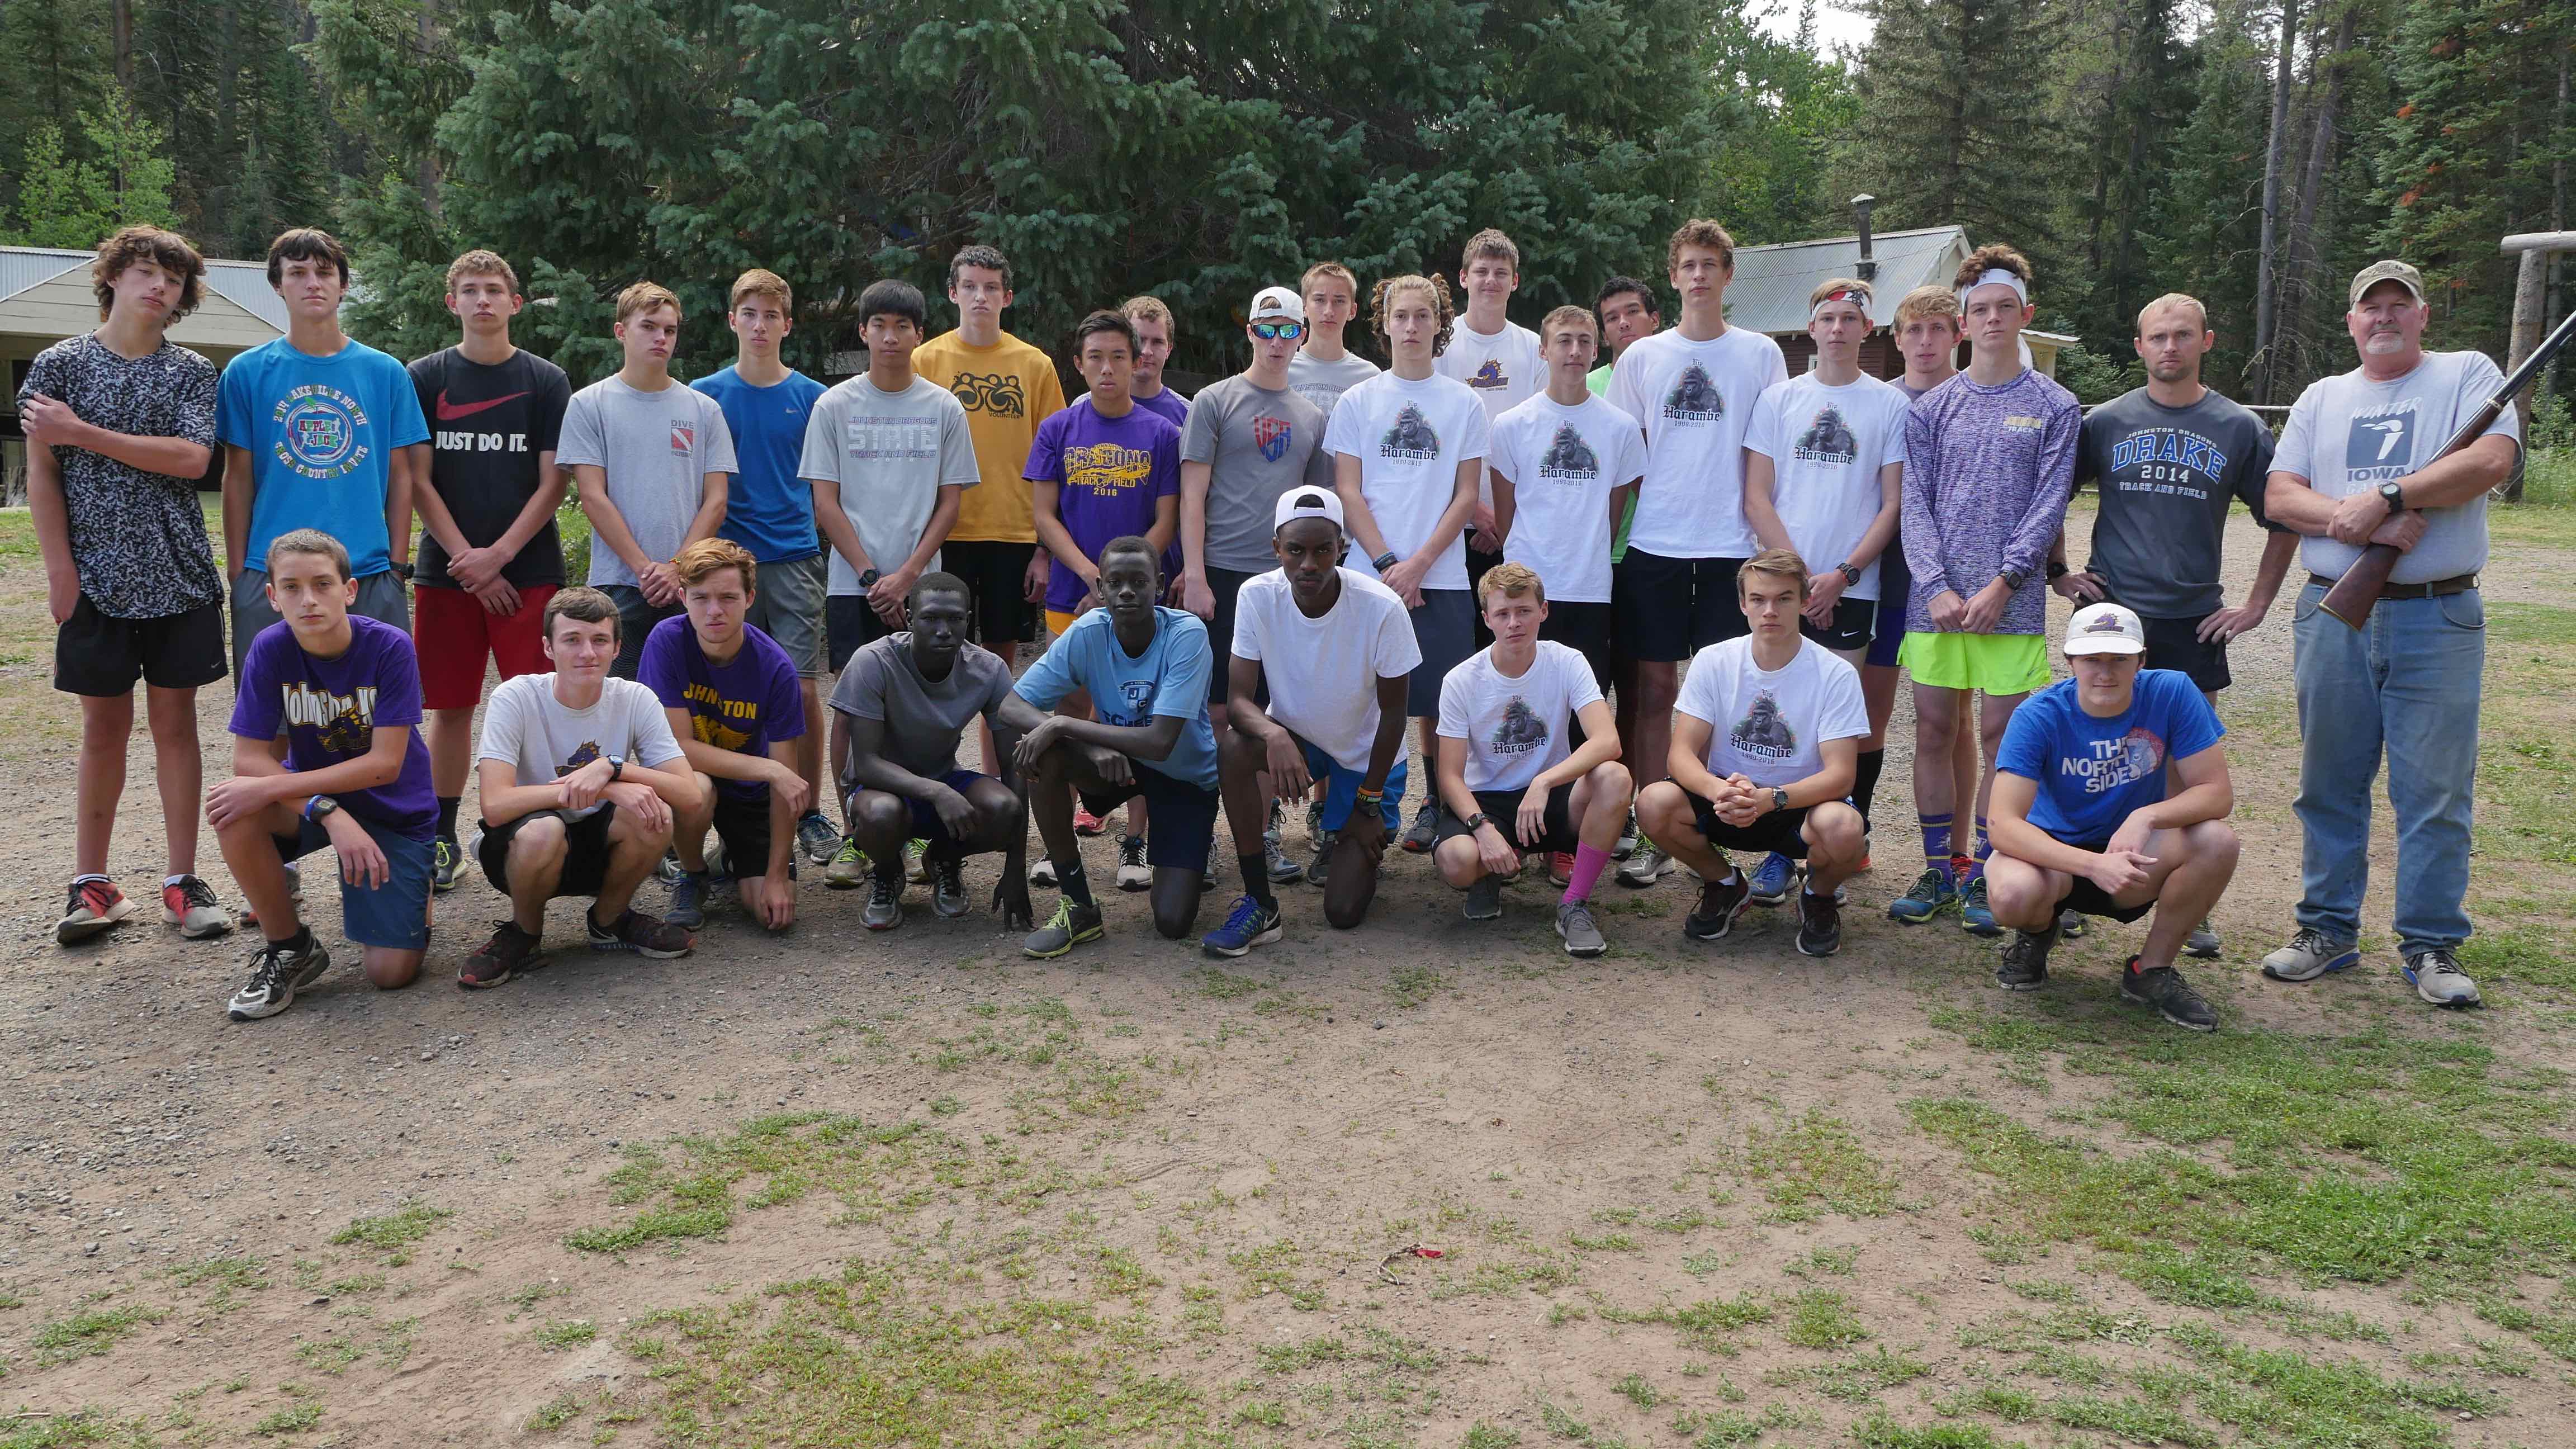 x-country team trains at Ute Lodge